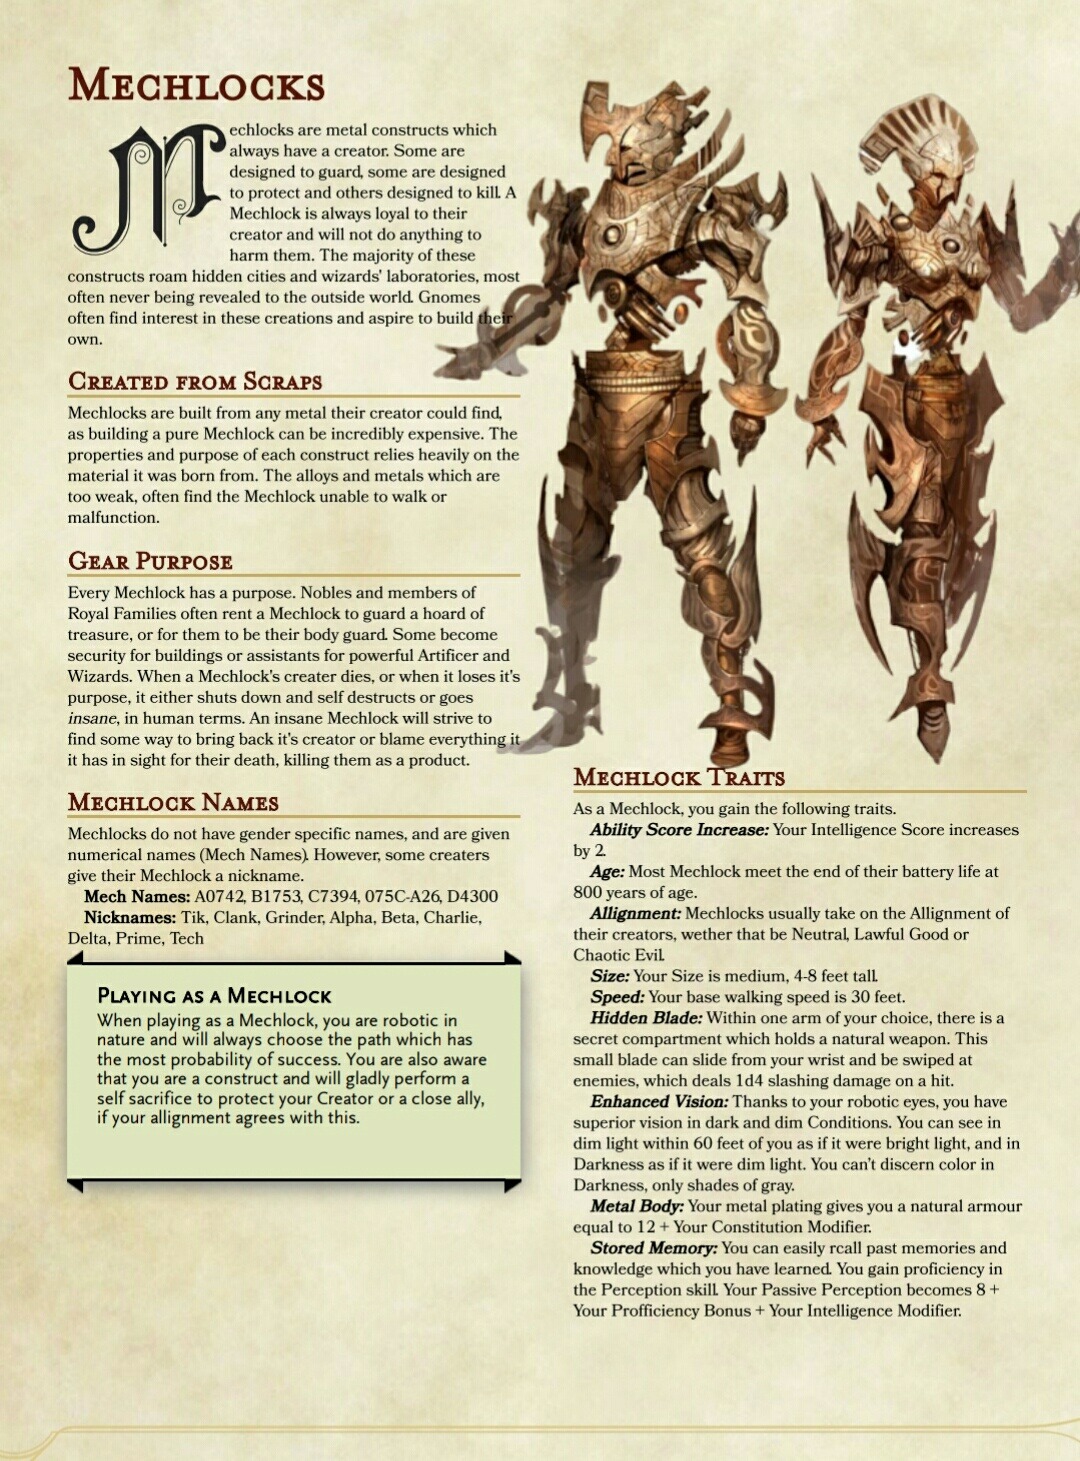 dnd-5e-homebrew-domain-of-madness-cleric-by-the-singular-anyone